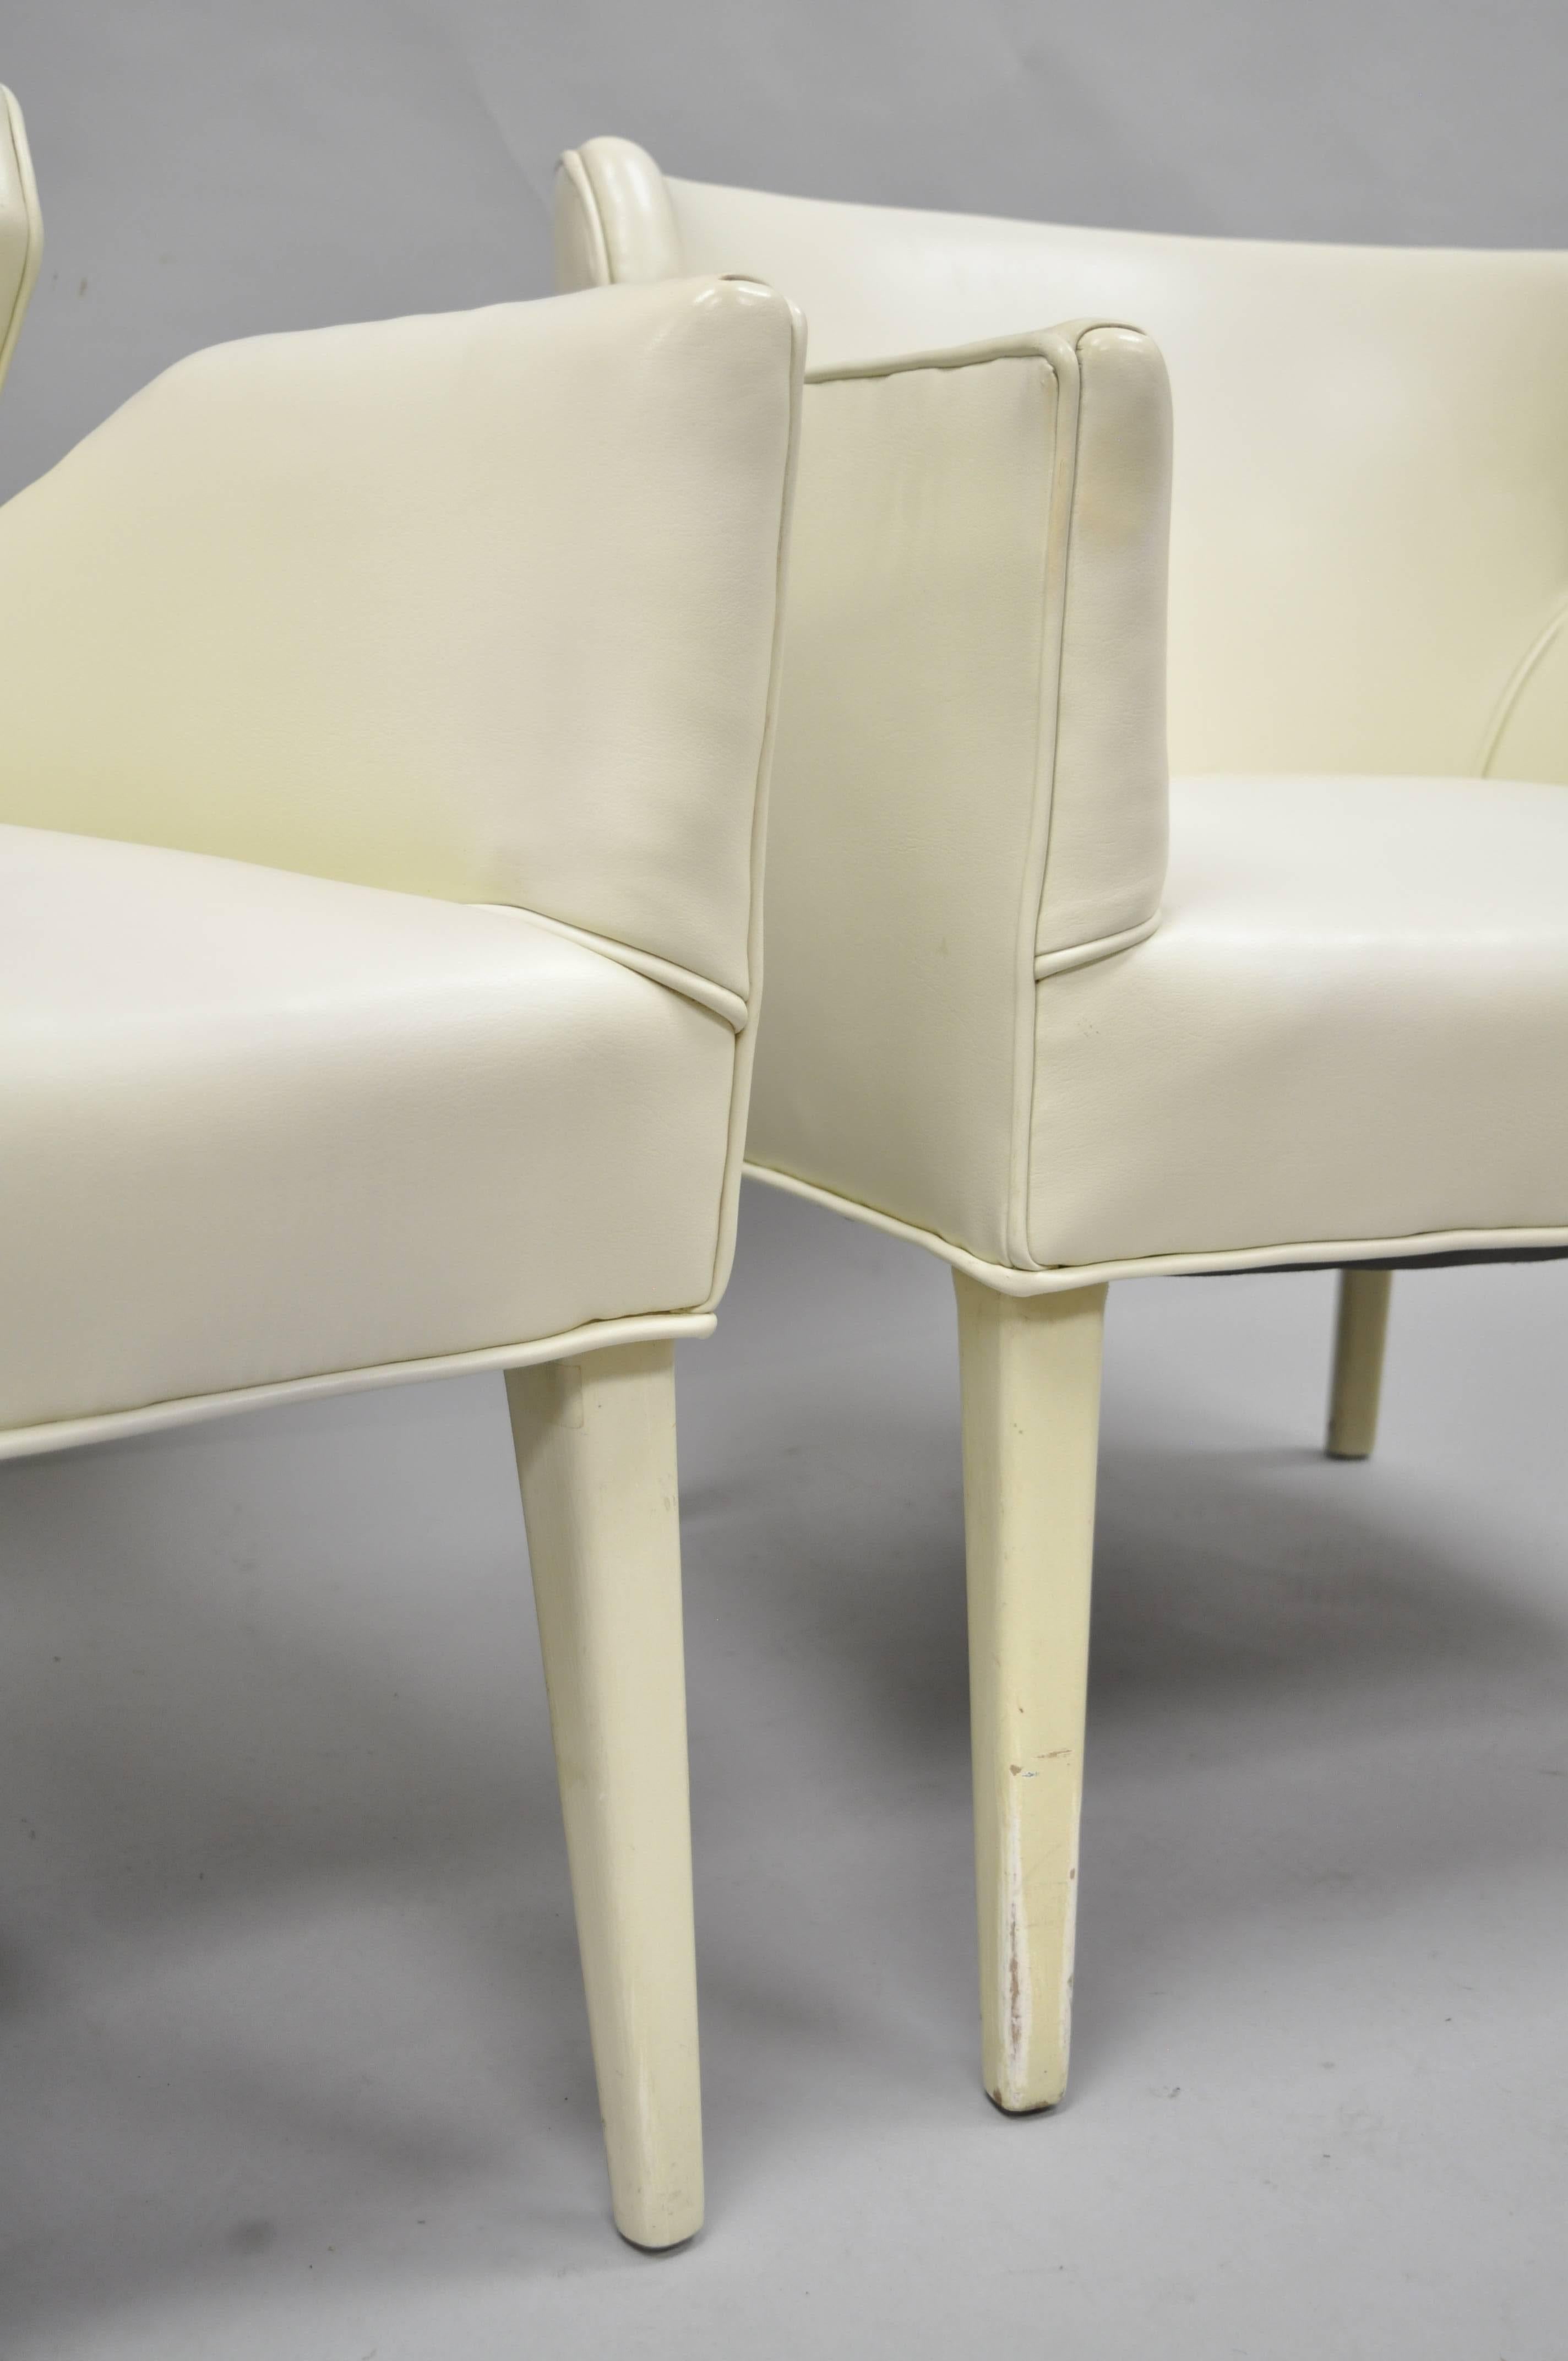 Mid-20th Century Pair of Barrel Back Sculptural Off-White Vinyl Lounge Chairs After Paul McCobb